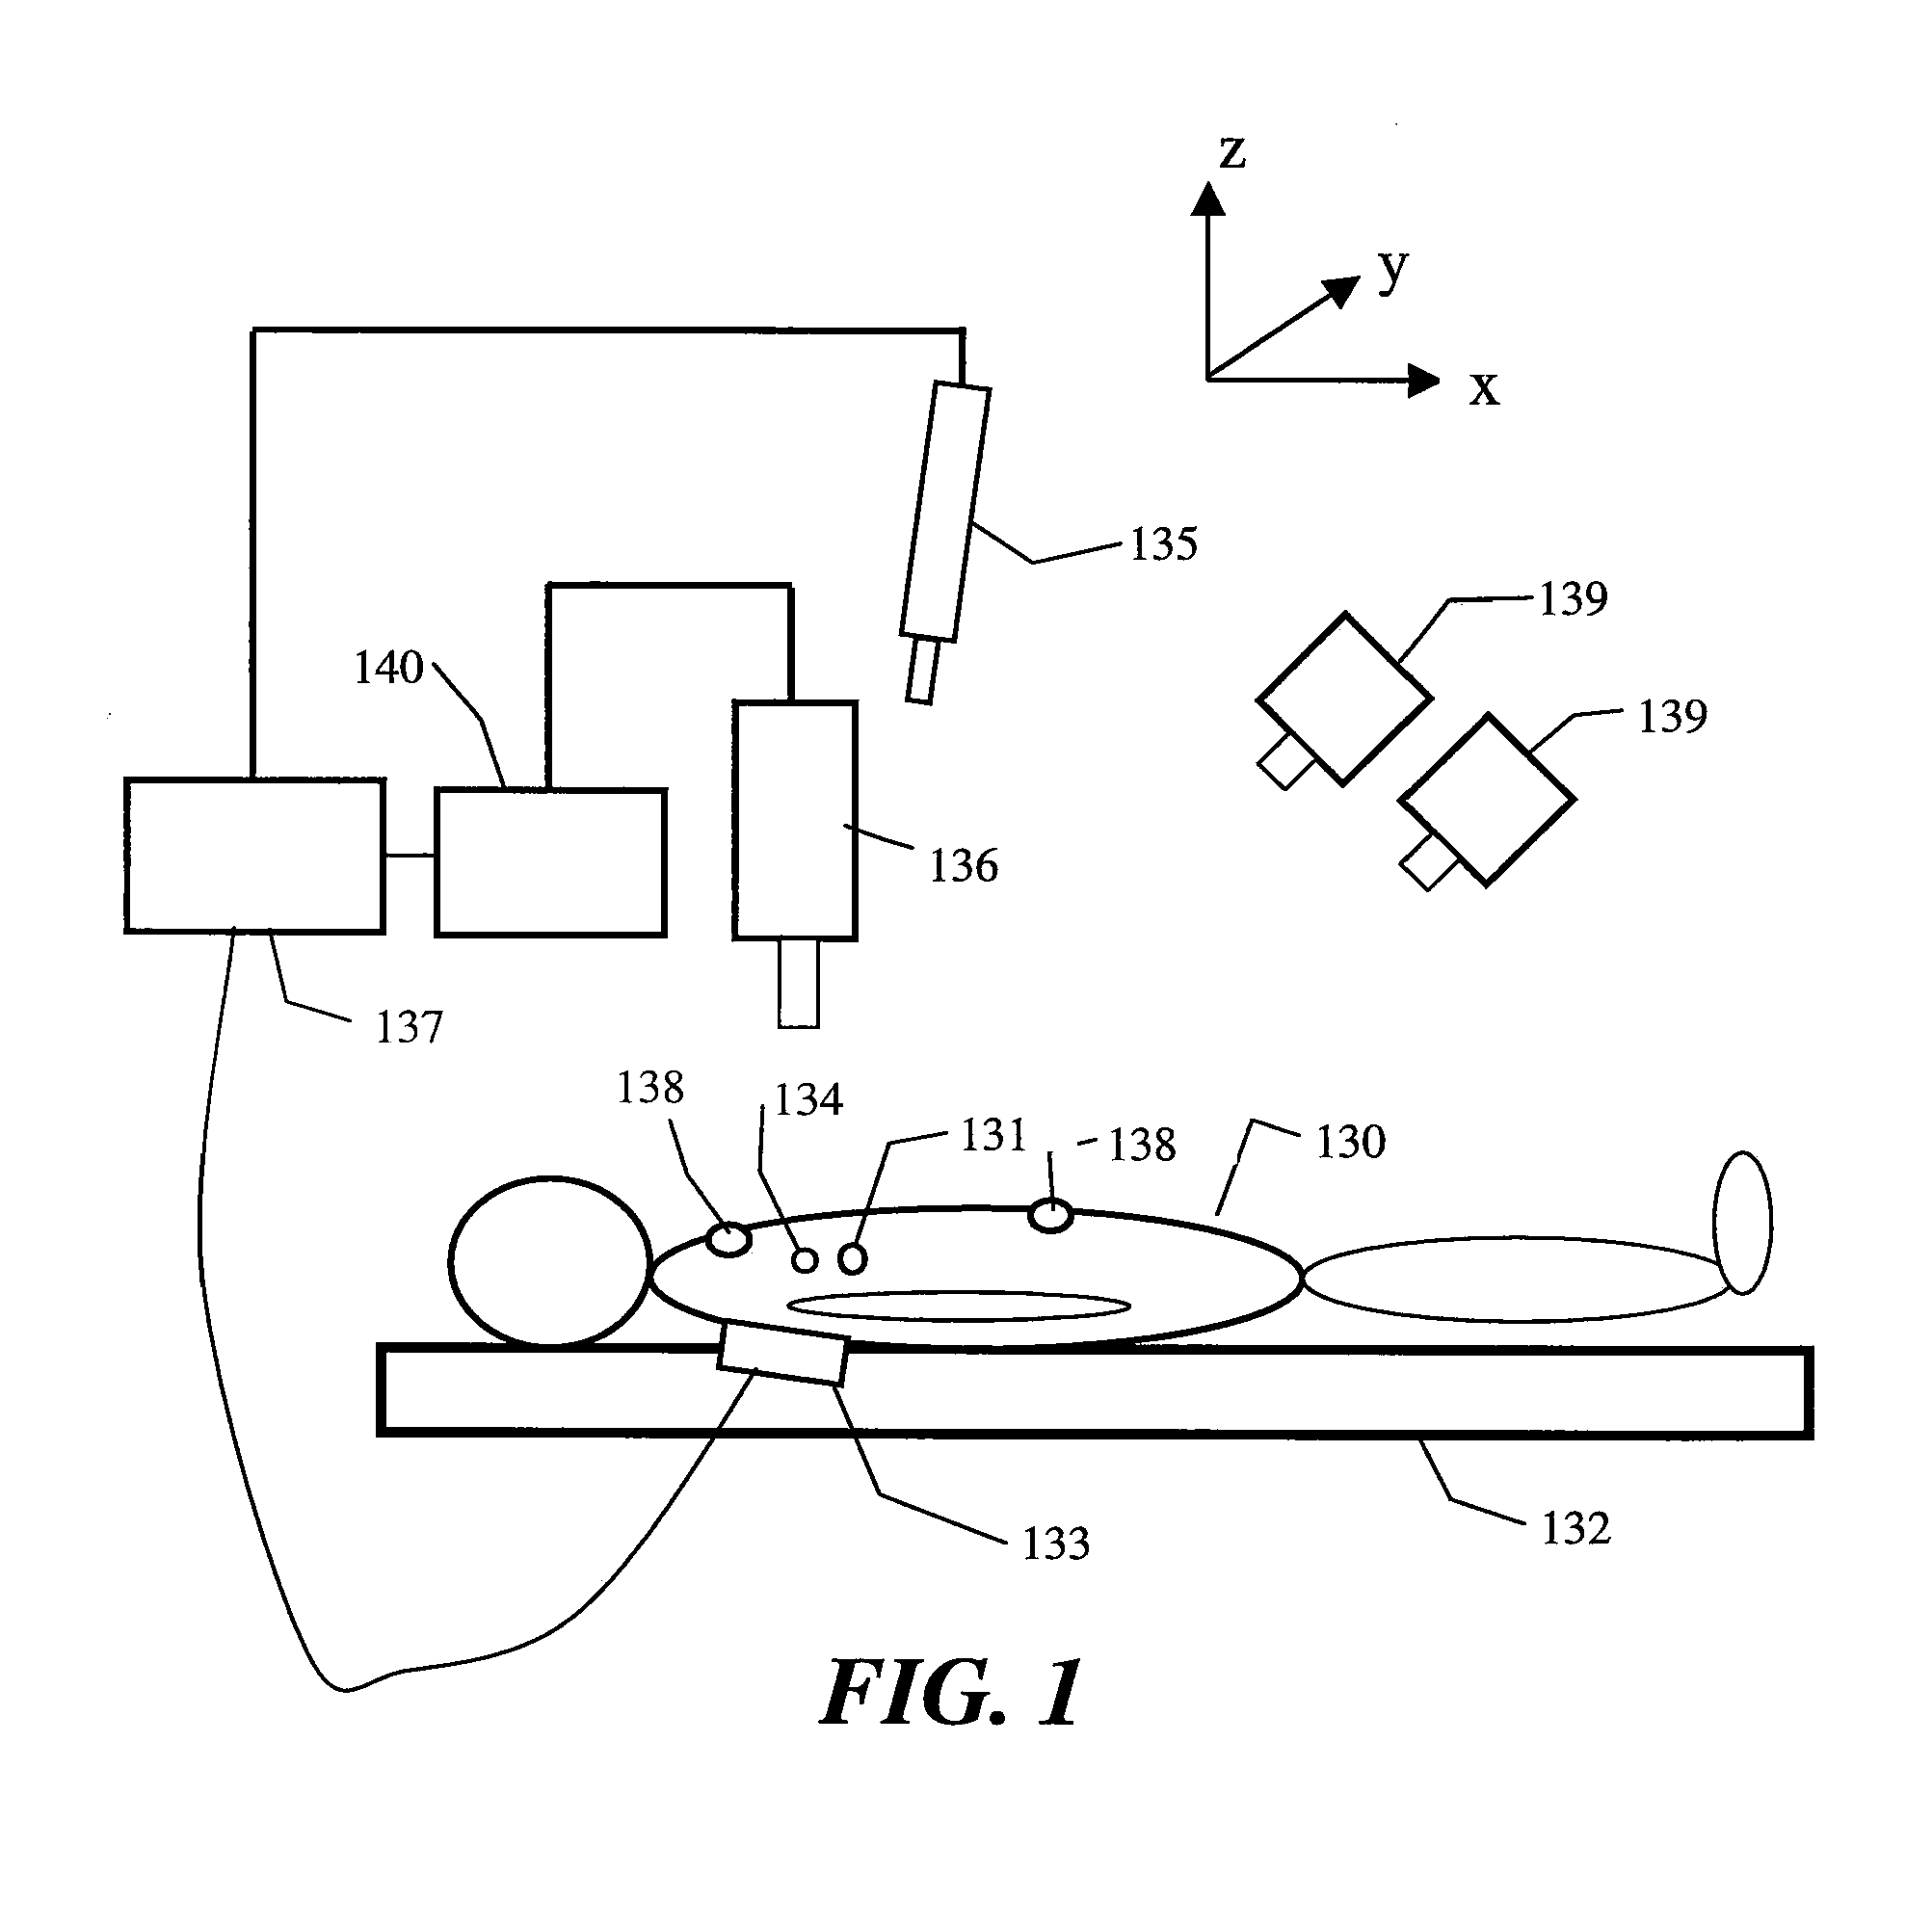 Radiation therapy method with target detection